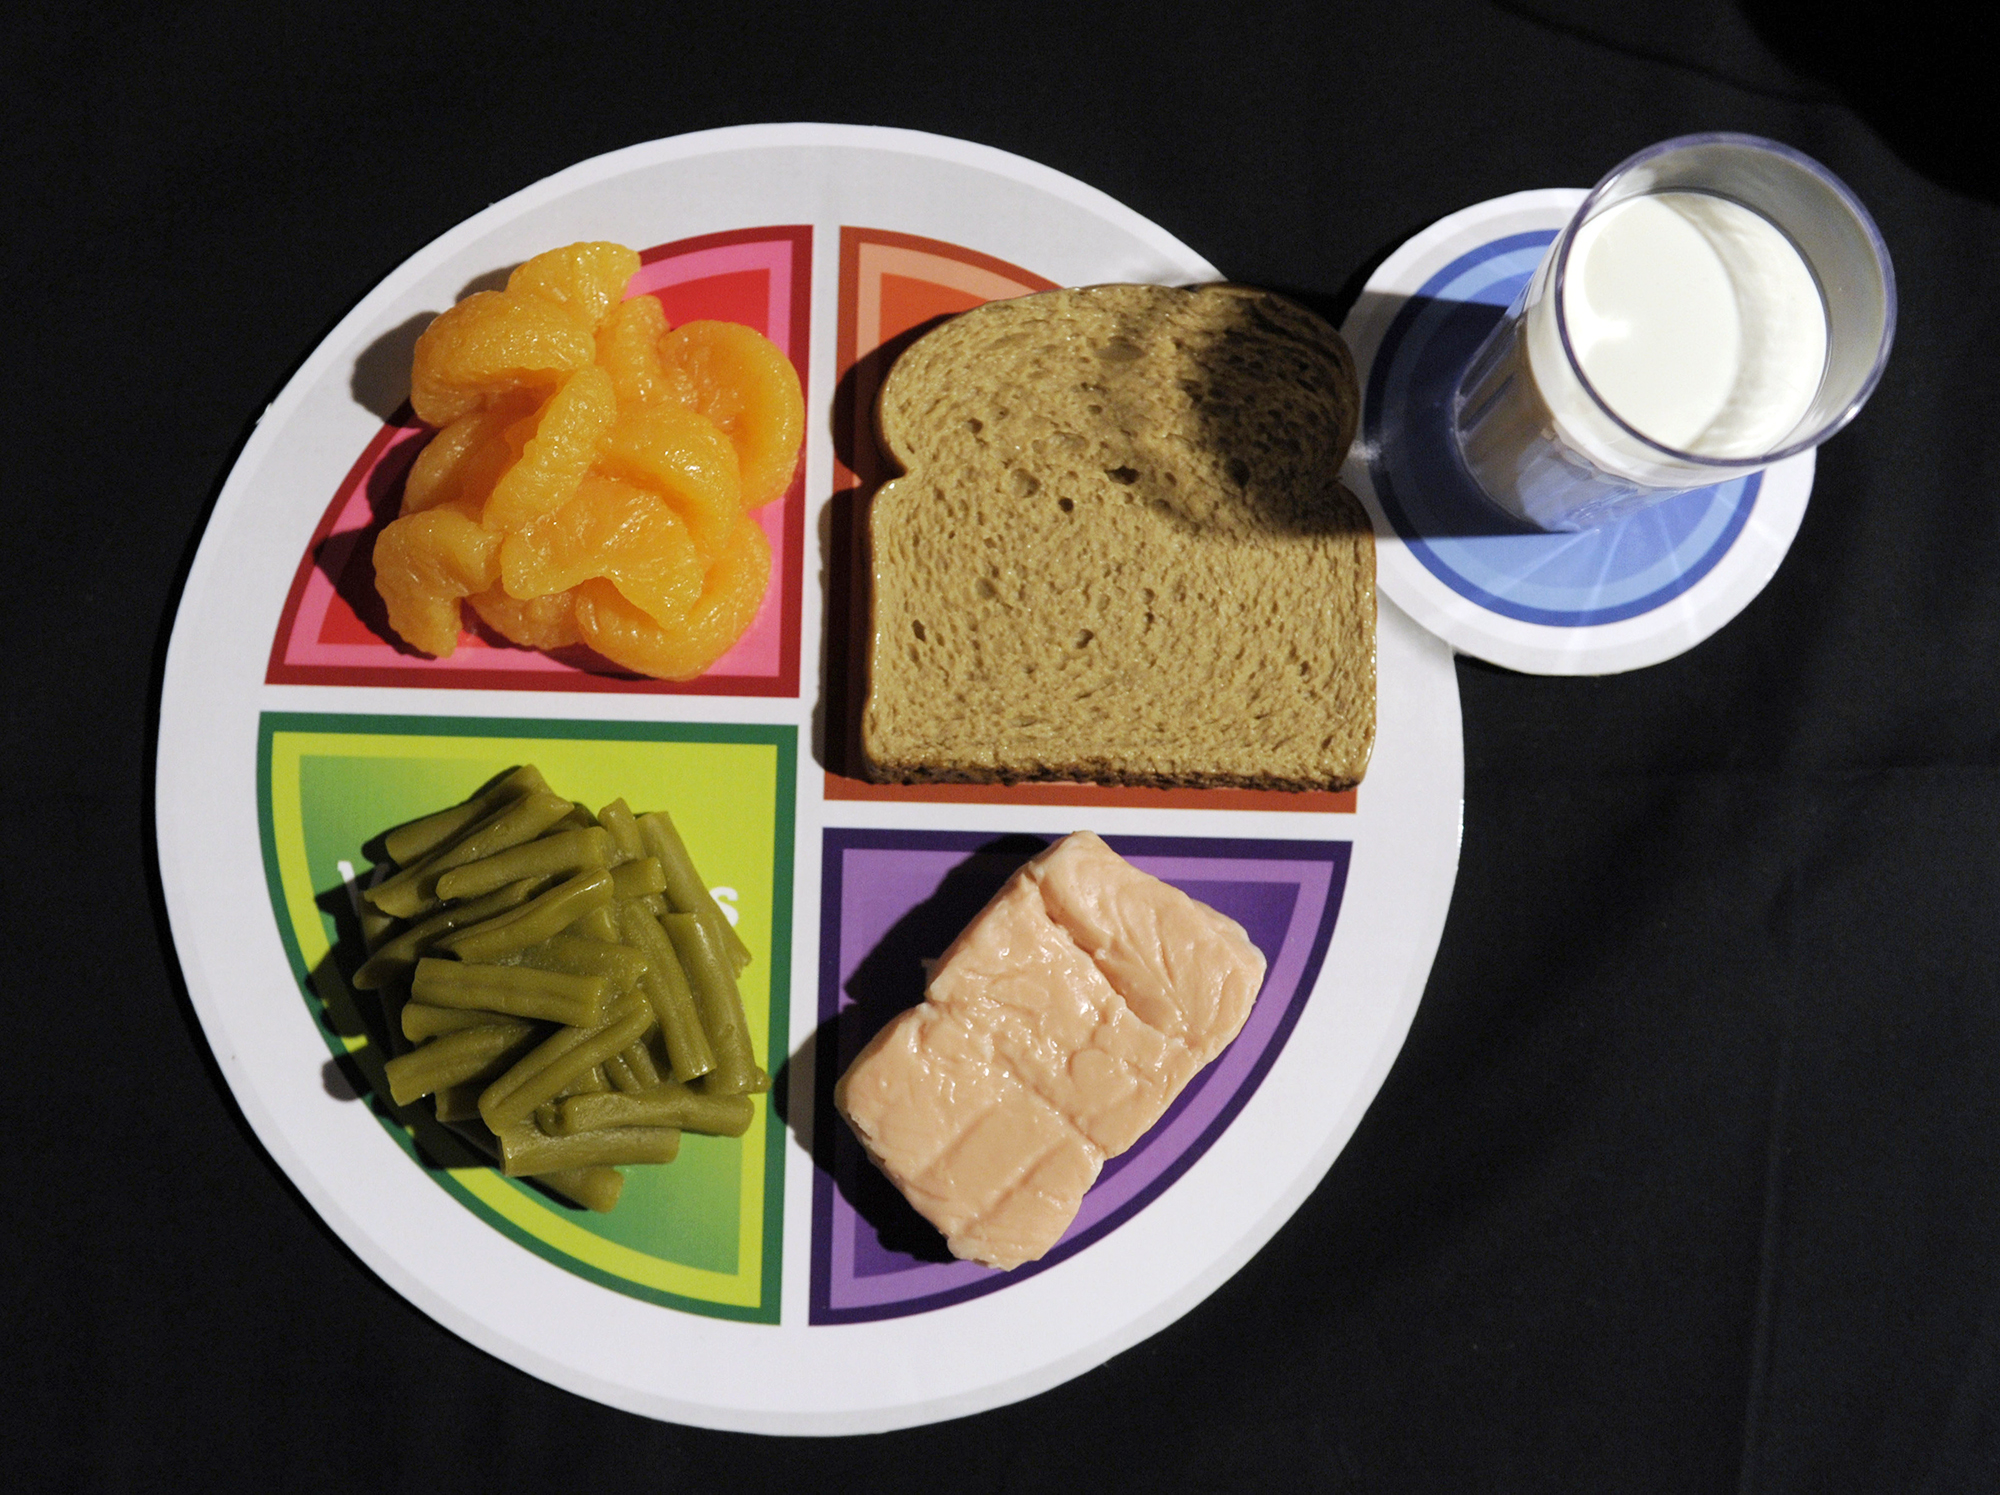 MyPlate? Few Americans know or heed U.S. nutrition guide